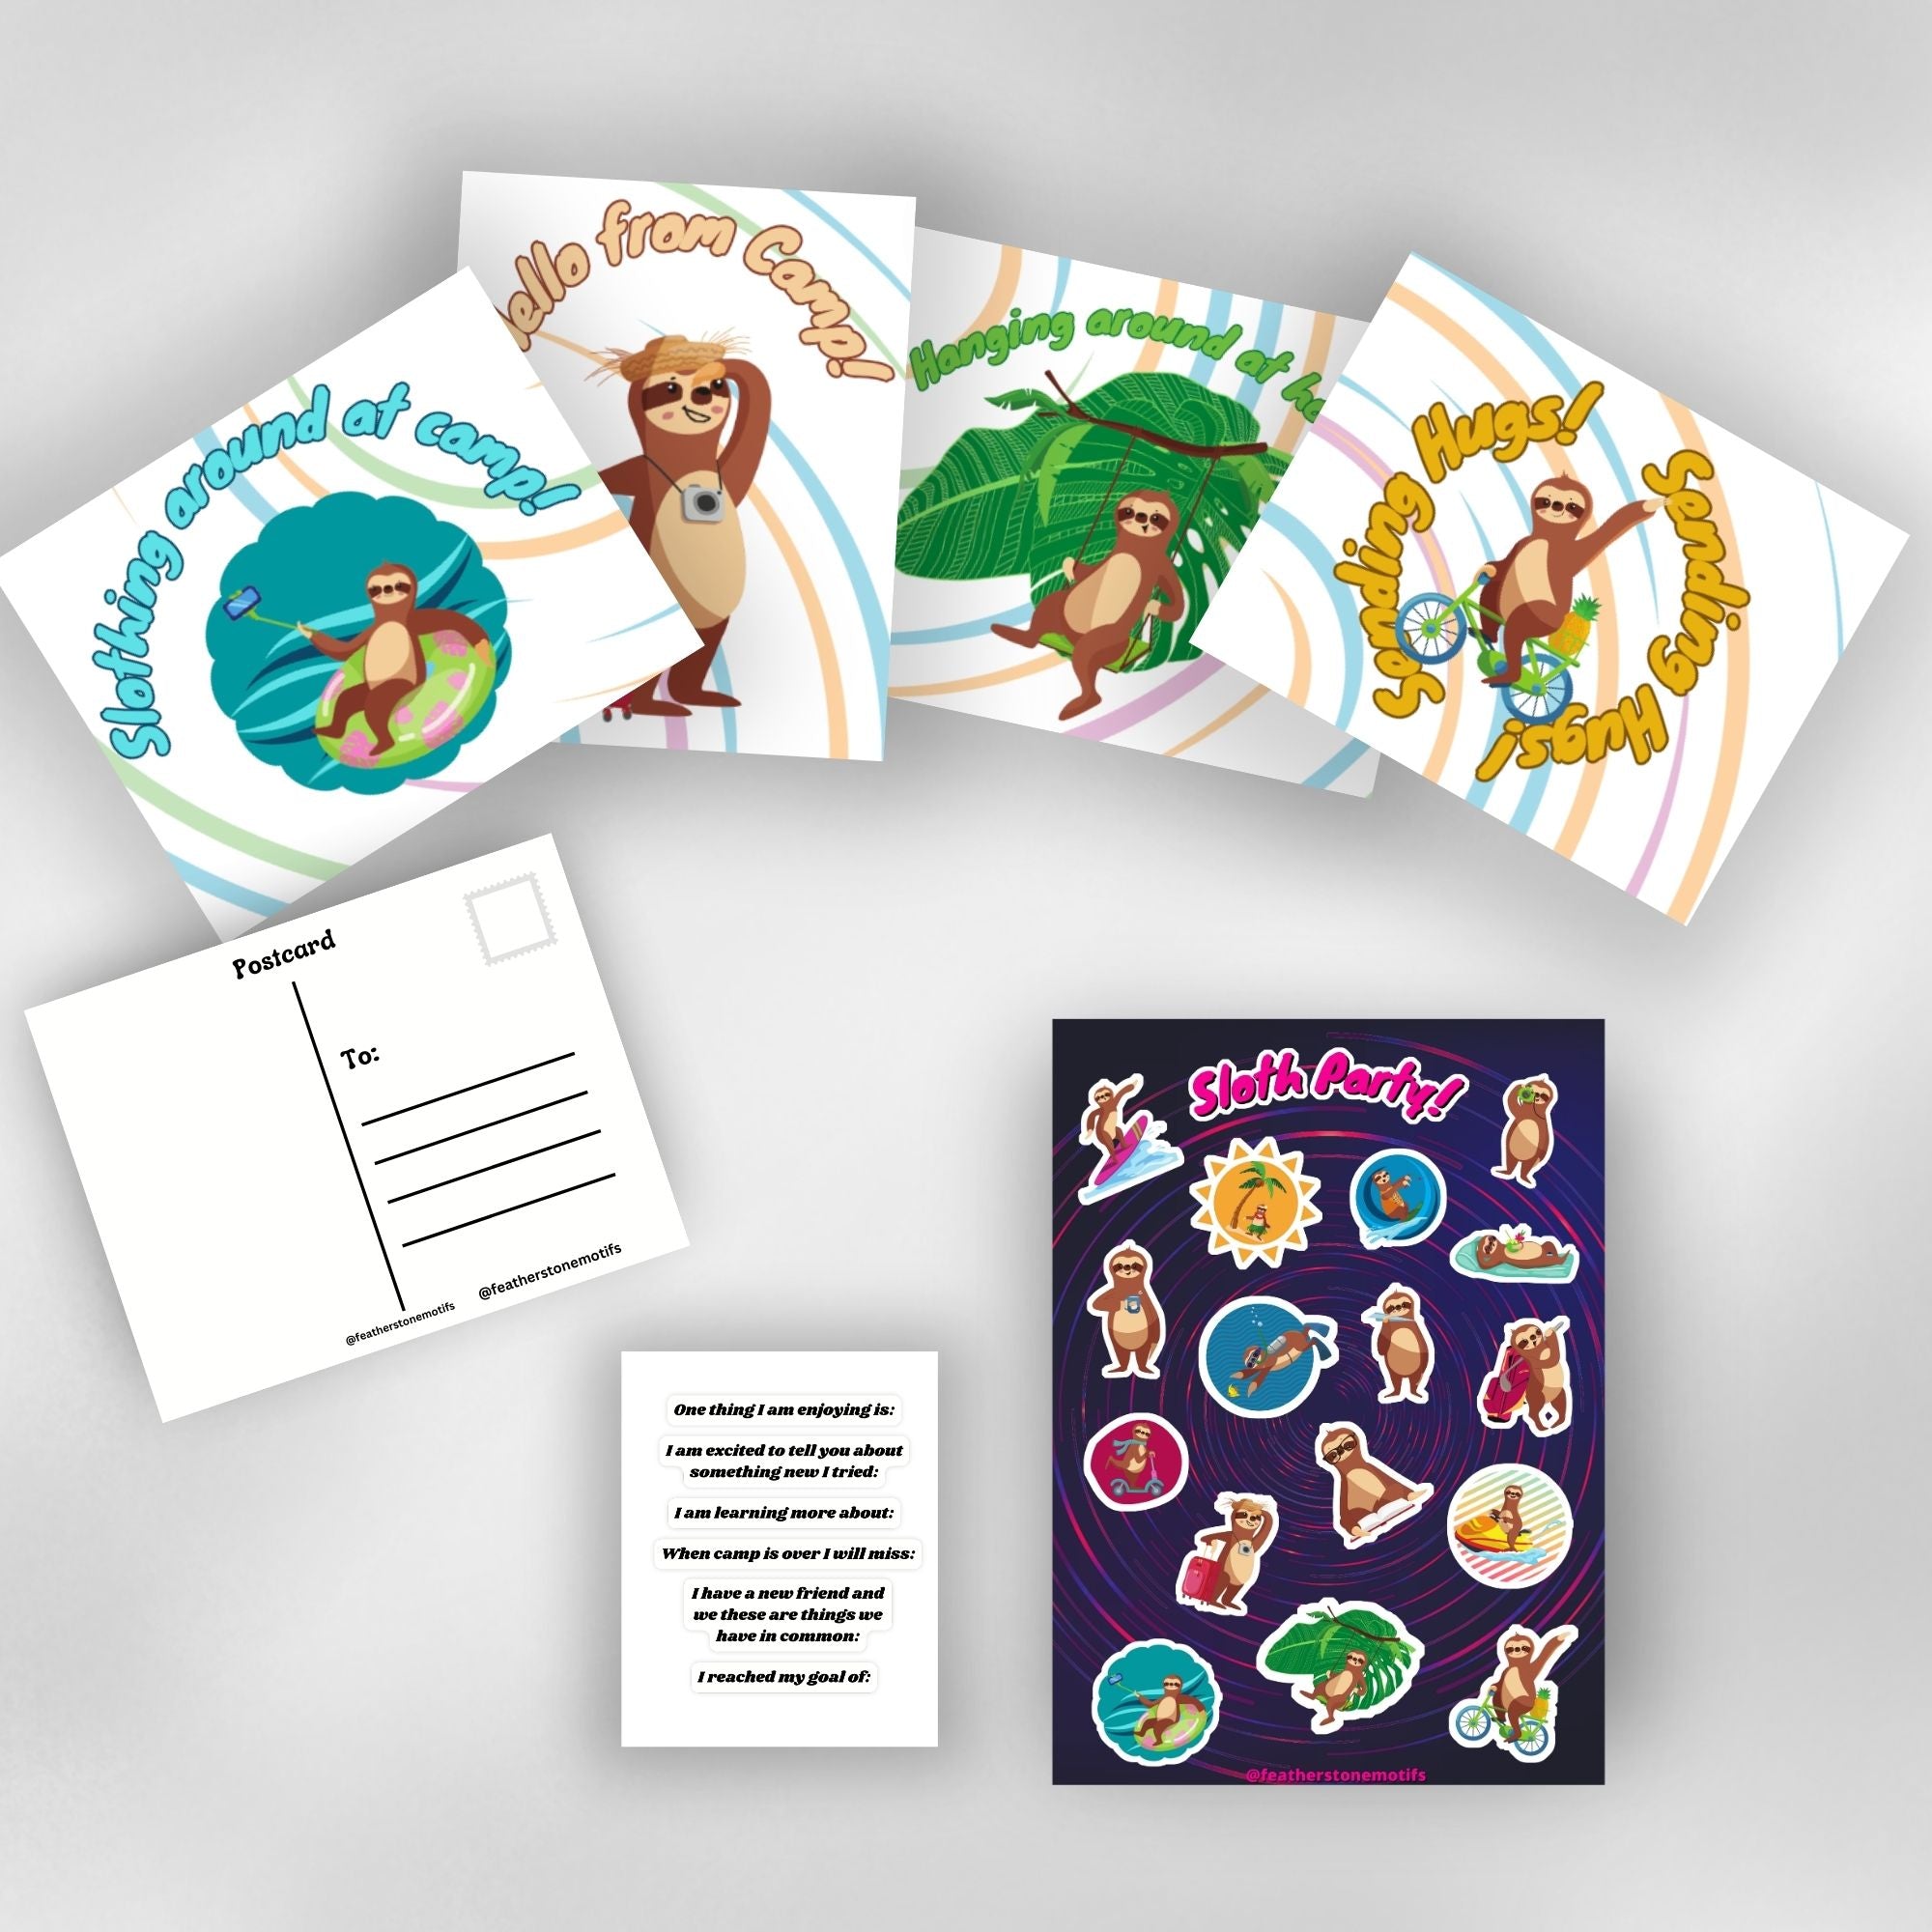 This image shows the full Sloth themed Camp Postcard Kit.